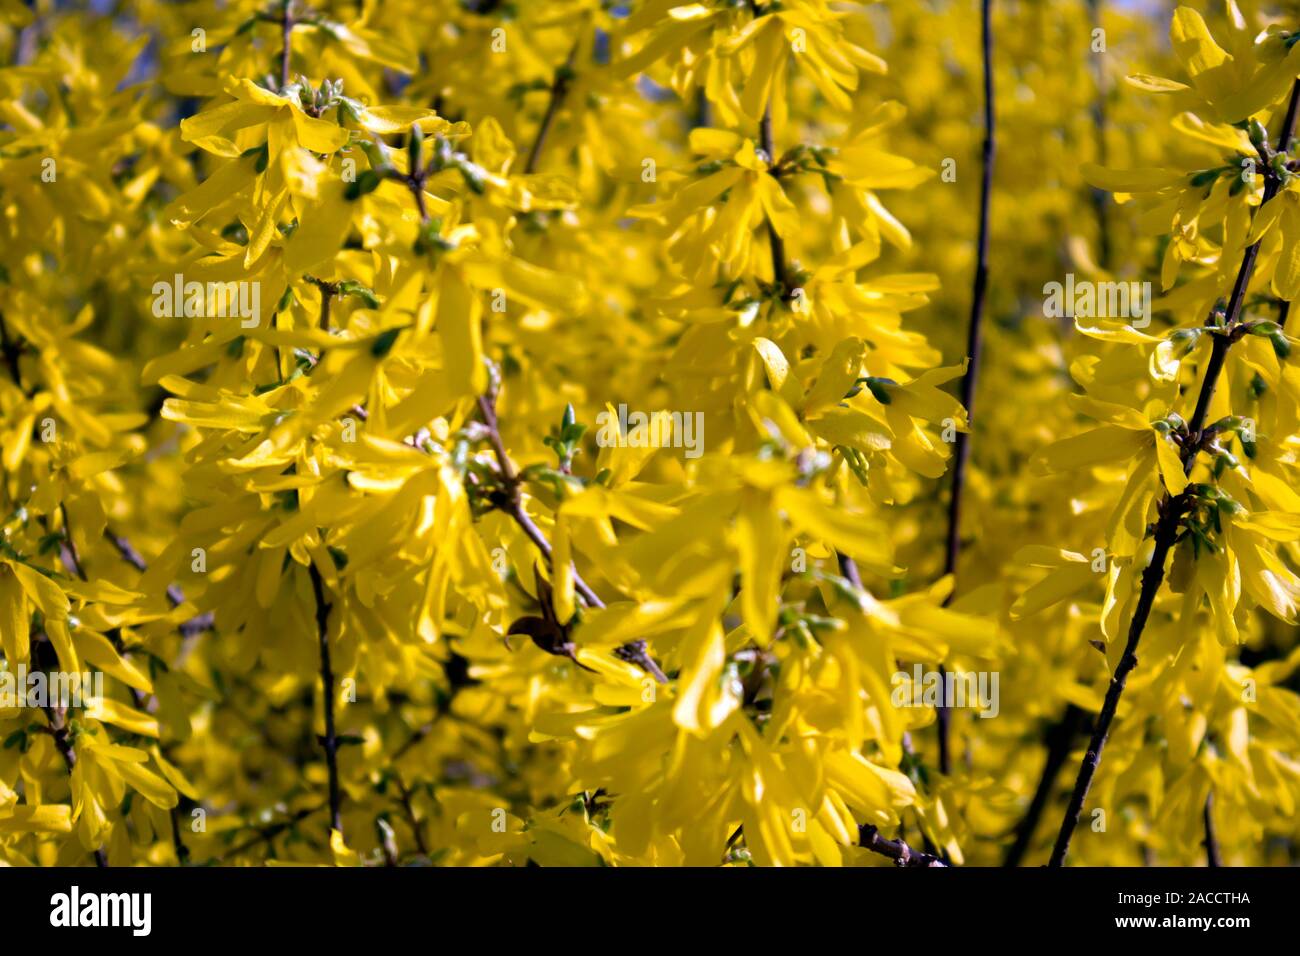 The branches of blooming Forsythia Intermedia covered with bright yellow flowers, natural floral background Stock Photo